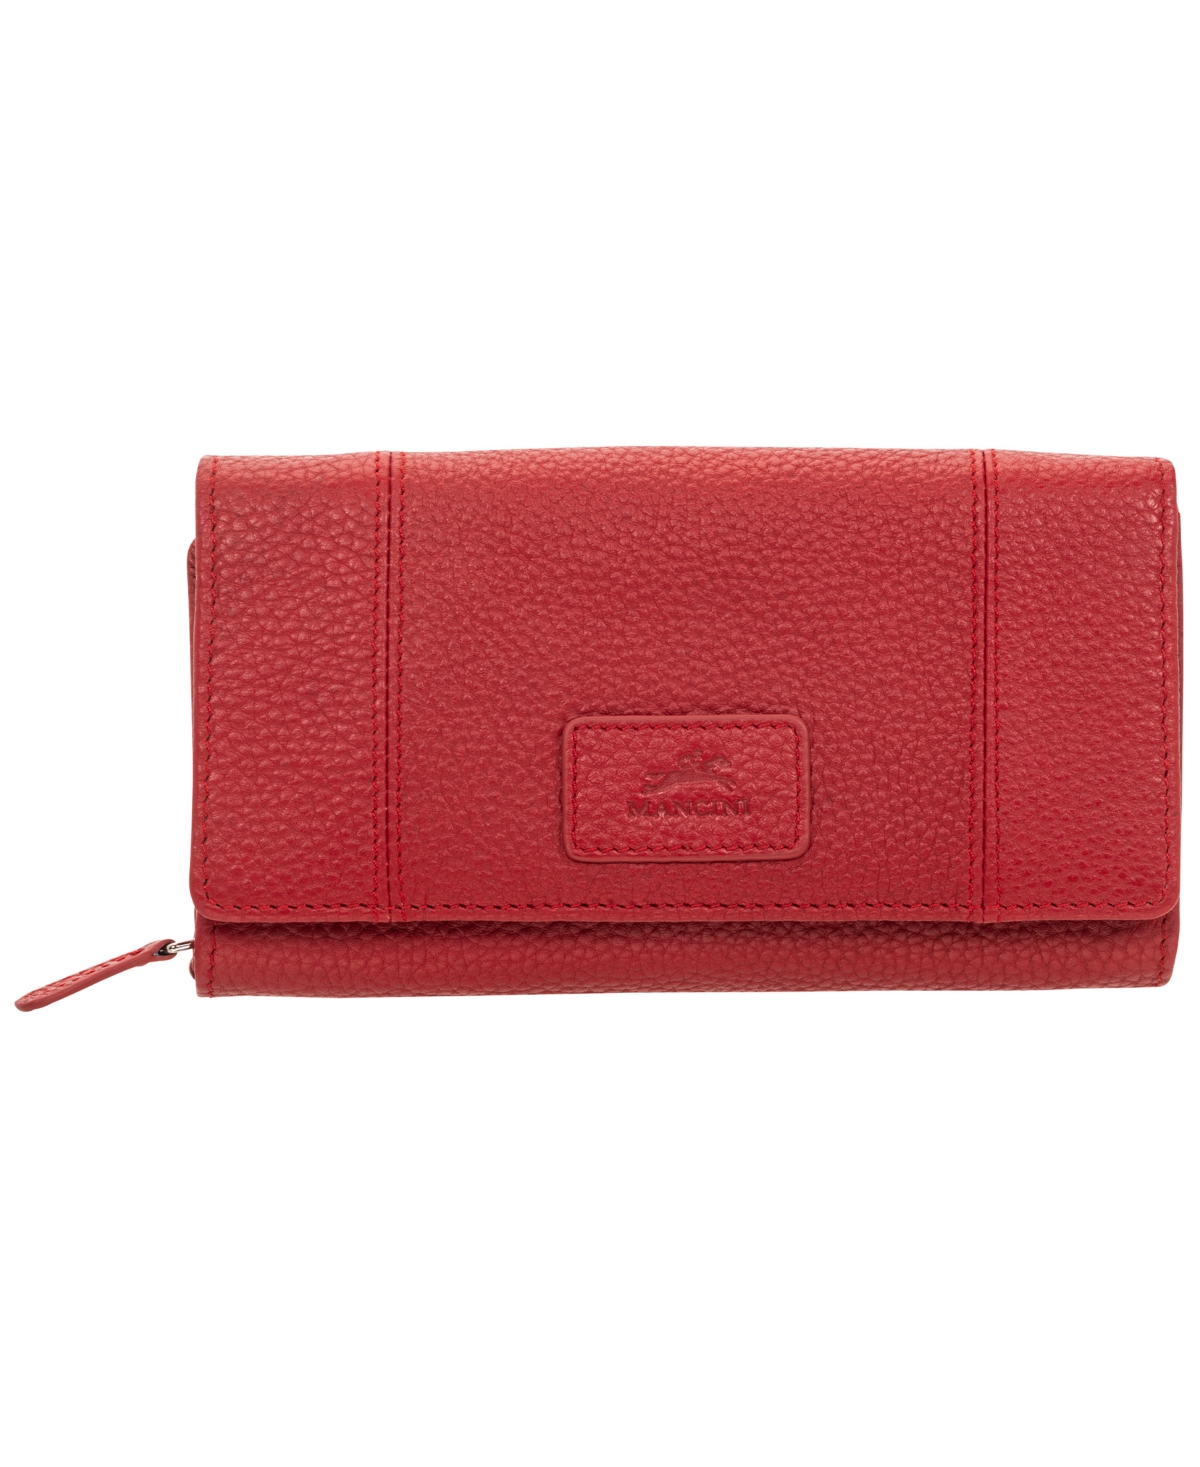 Mancini Women's Pebbled Collection Rfid Secure Mini Clutch Wallet